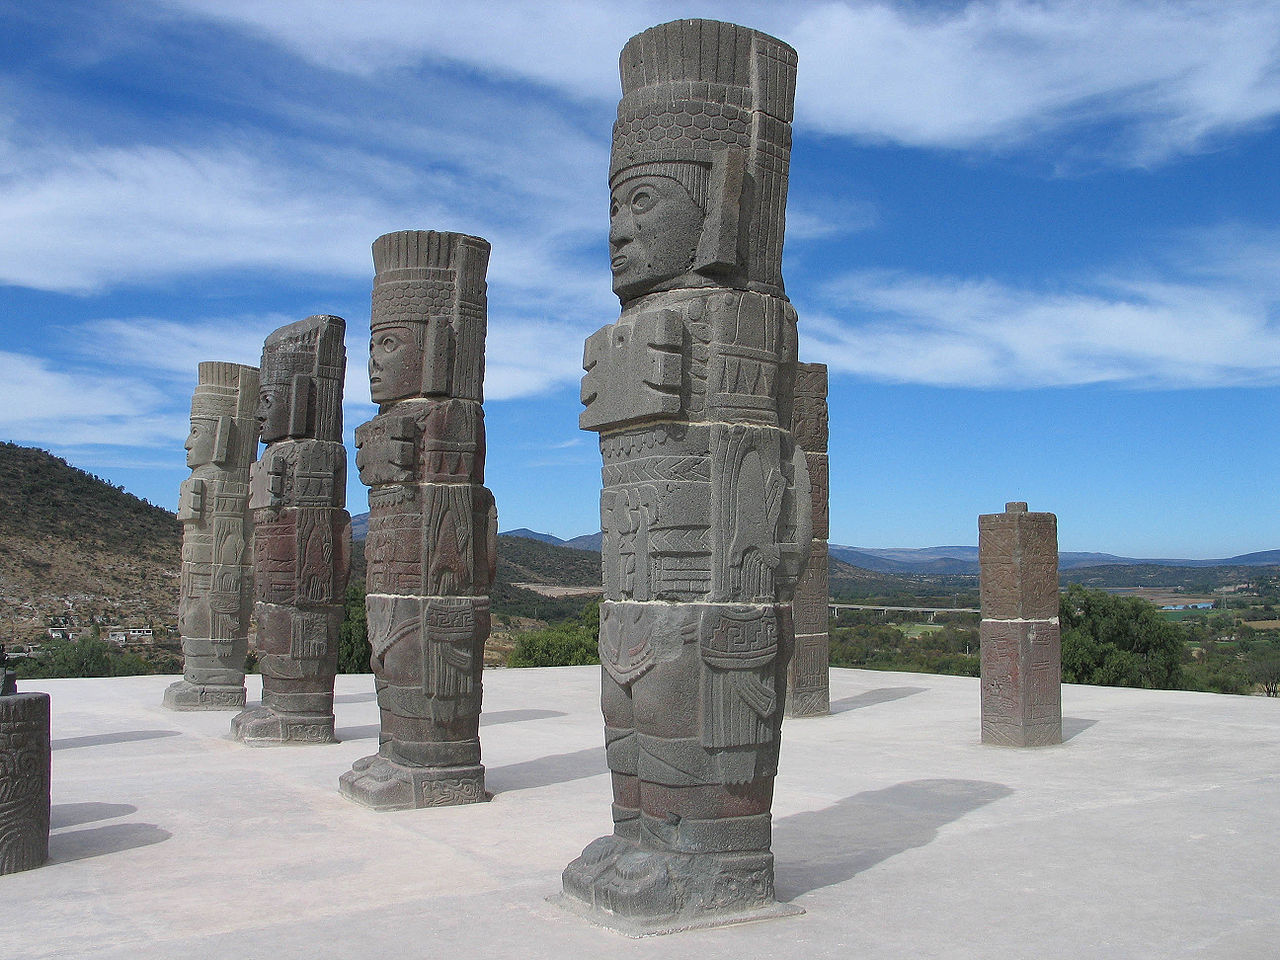 Stone statues of ancient Toltec warriors stand in a row on a platform with a scenic landscape in the background at Tula Archaeological Site, Mexico.